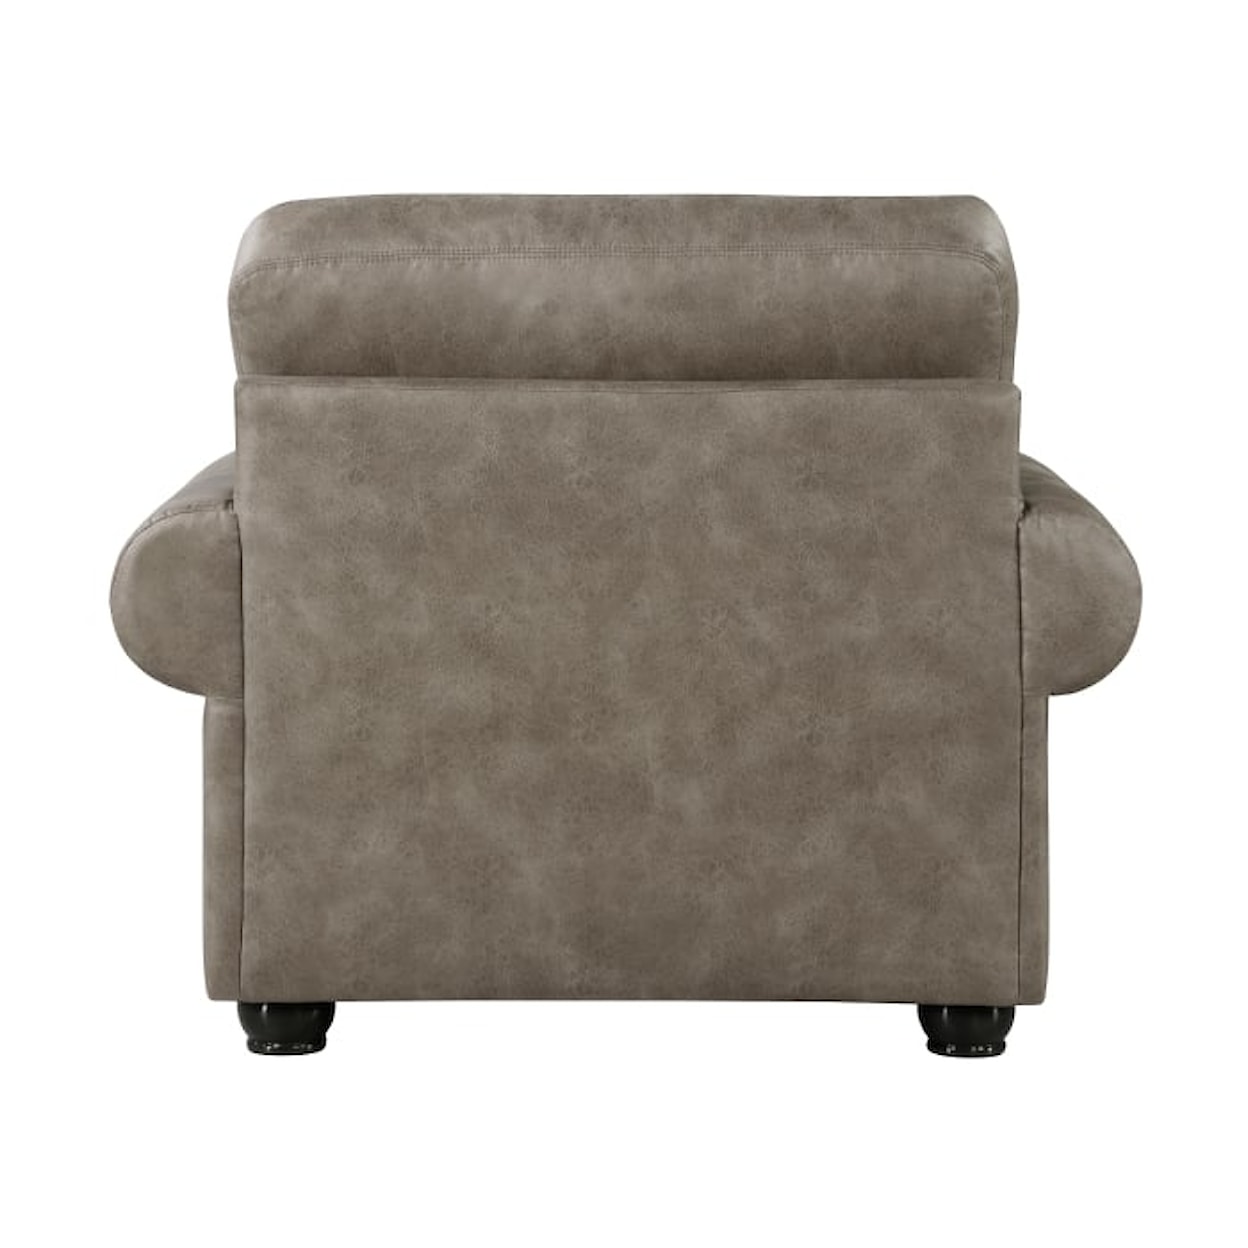 Homelegance Franklin Accent Chair